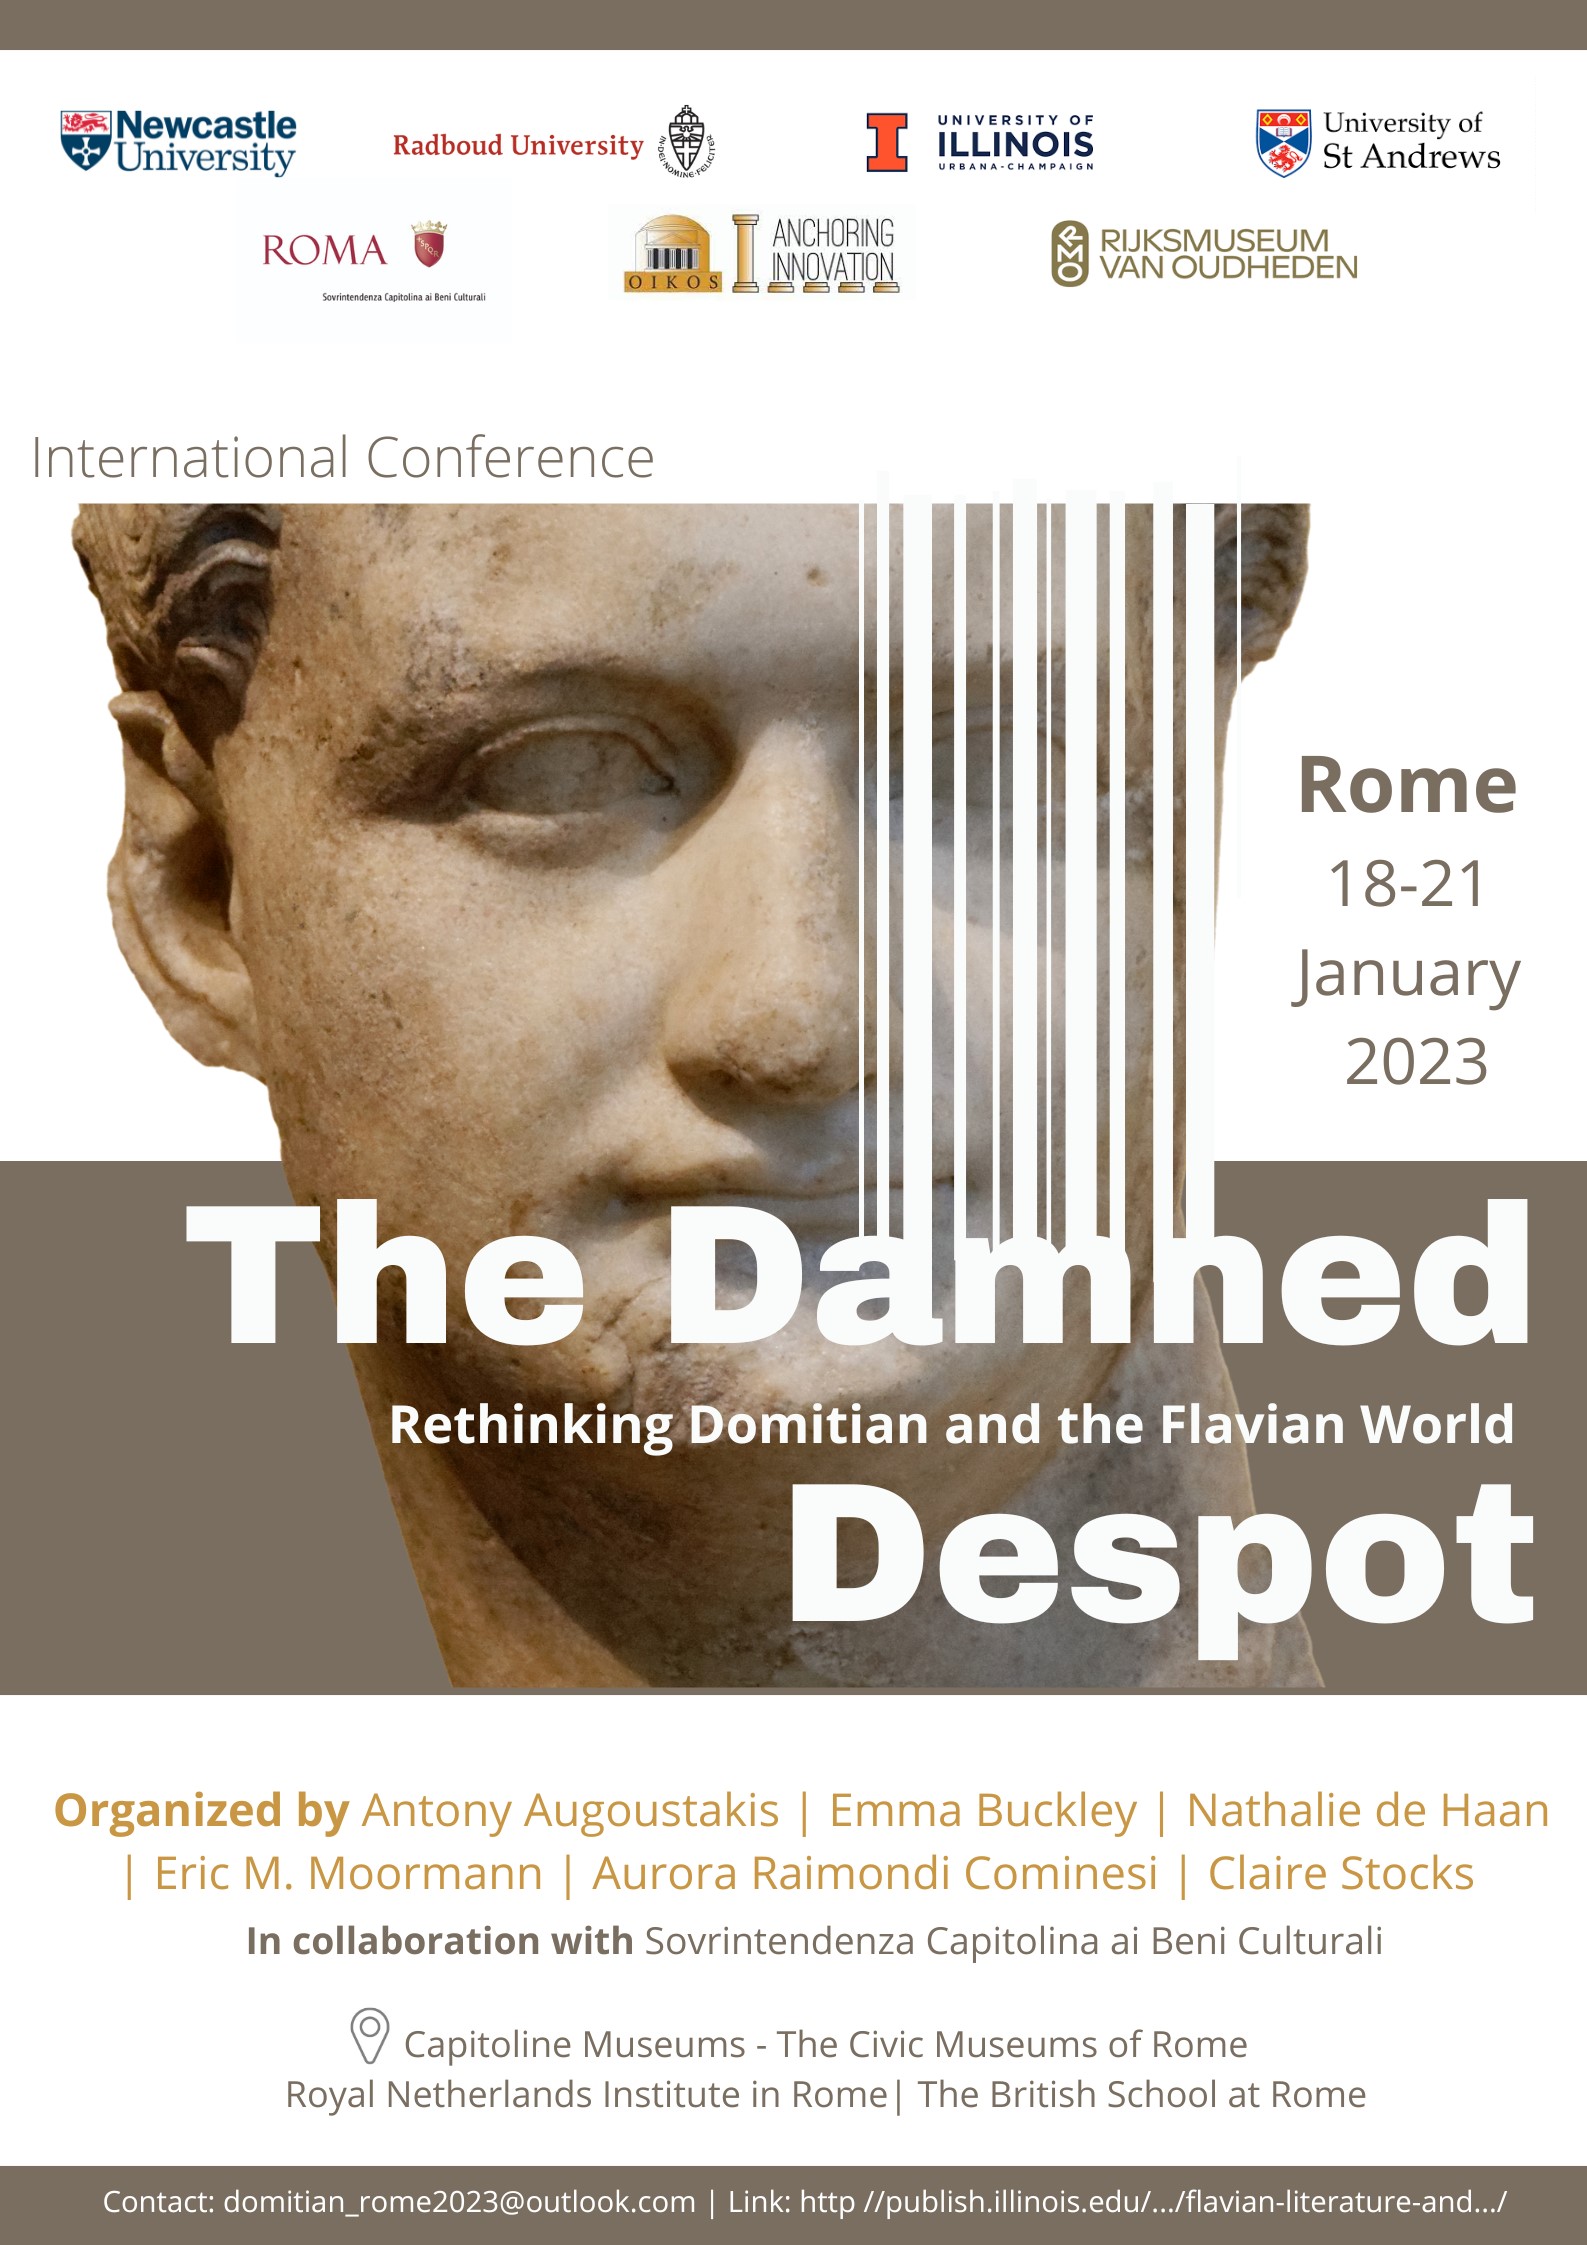 Poster for "The Damned Despot: Rethinking Domitian and the Flavian World"